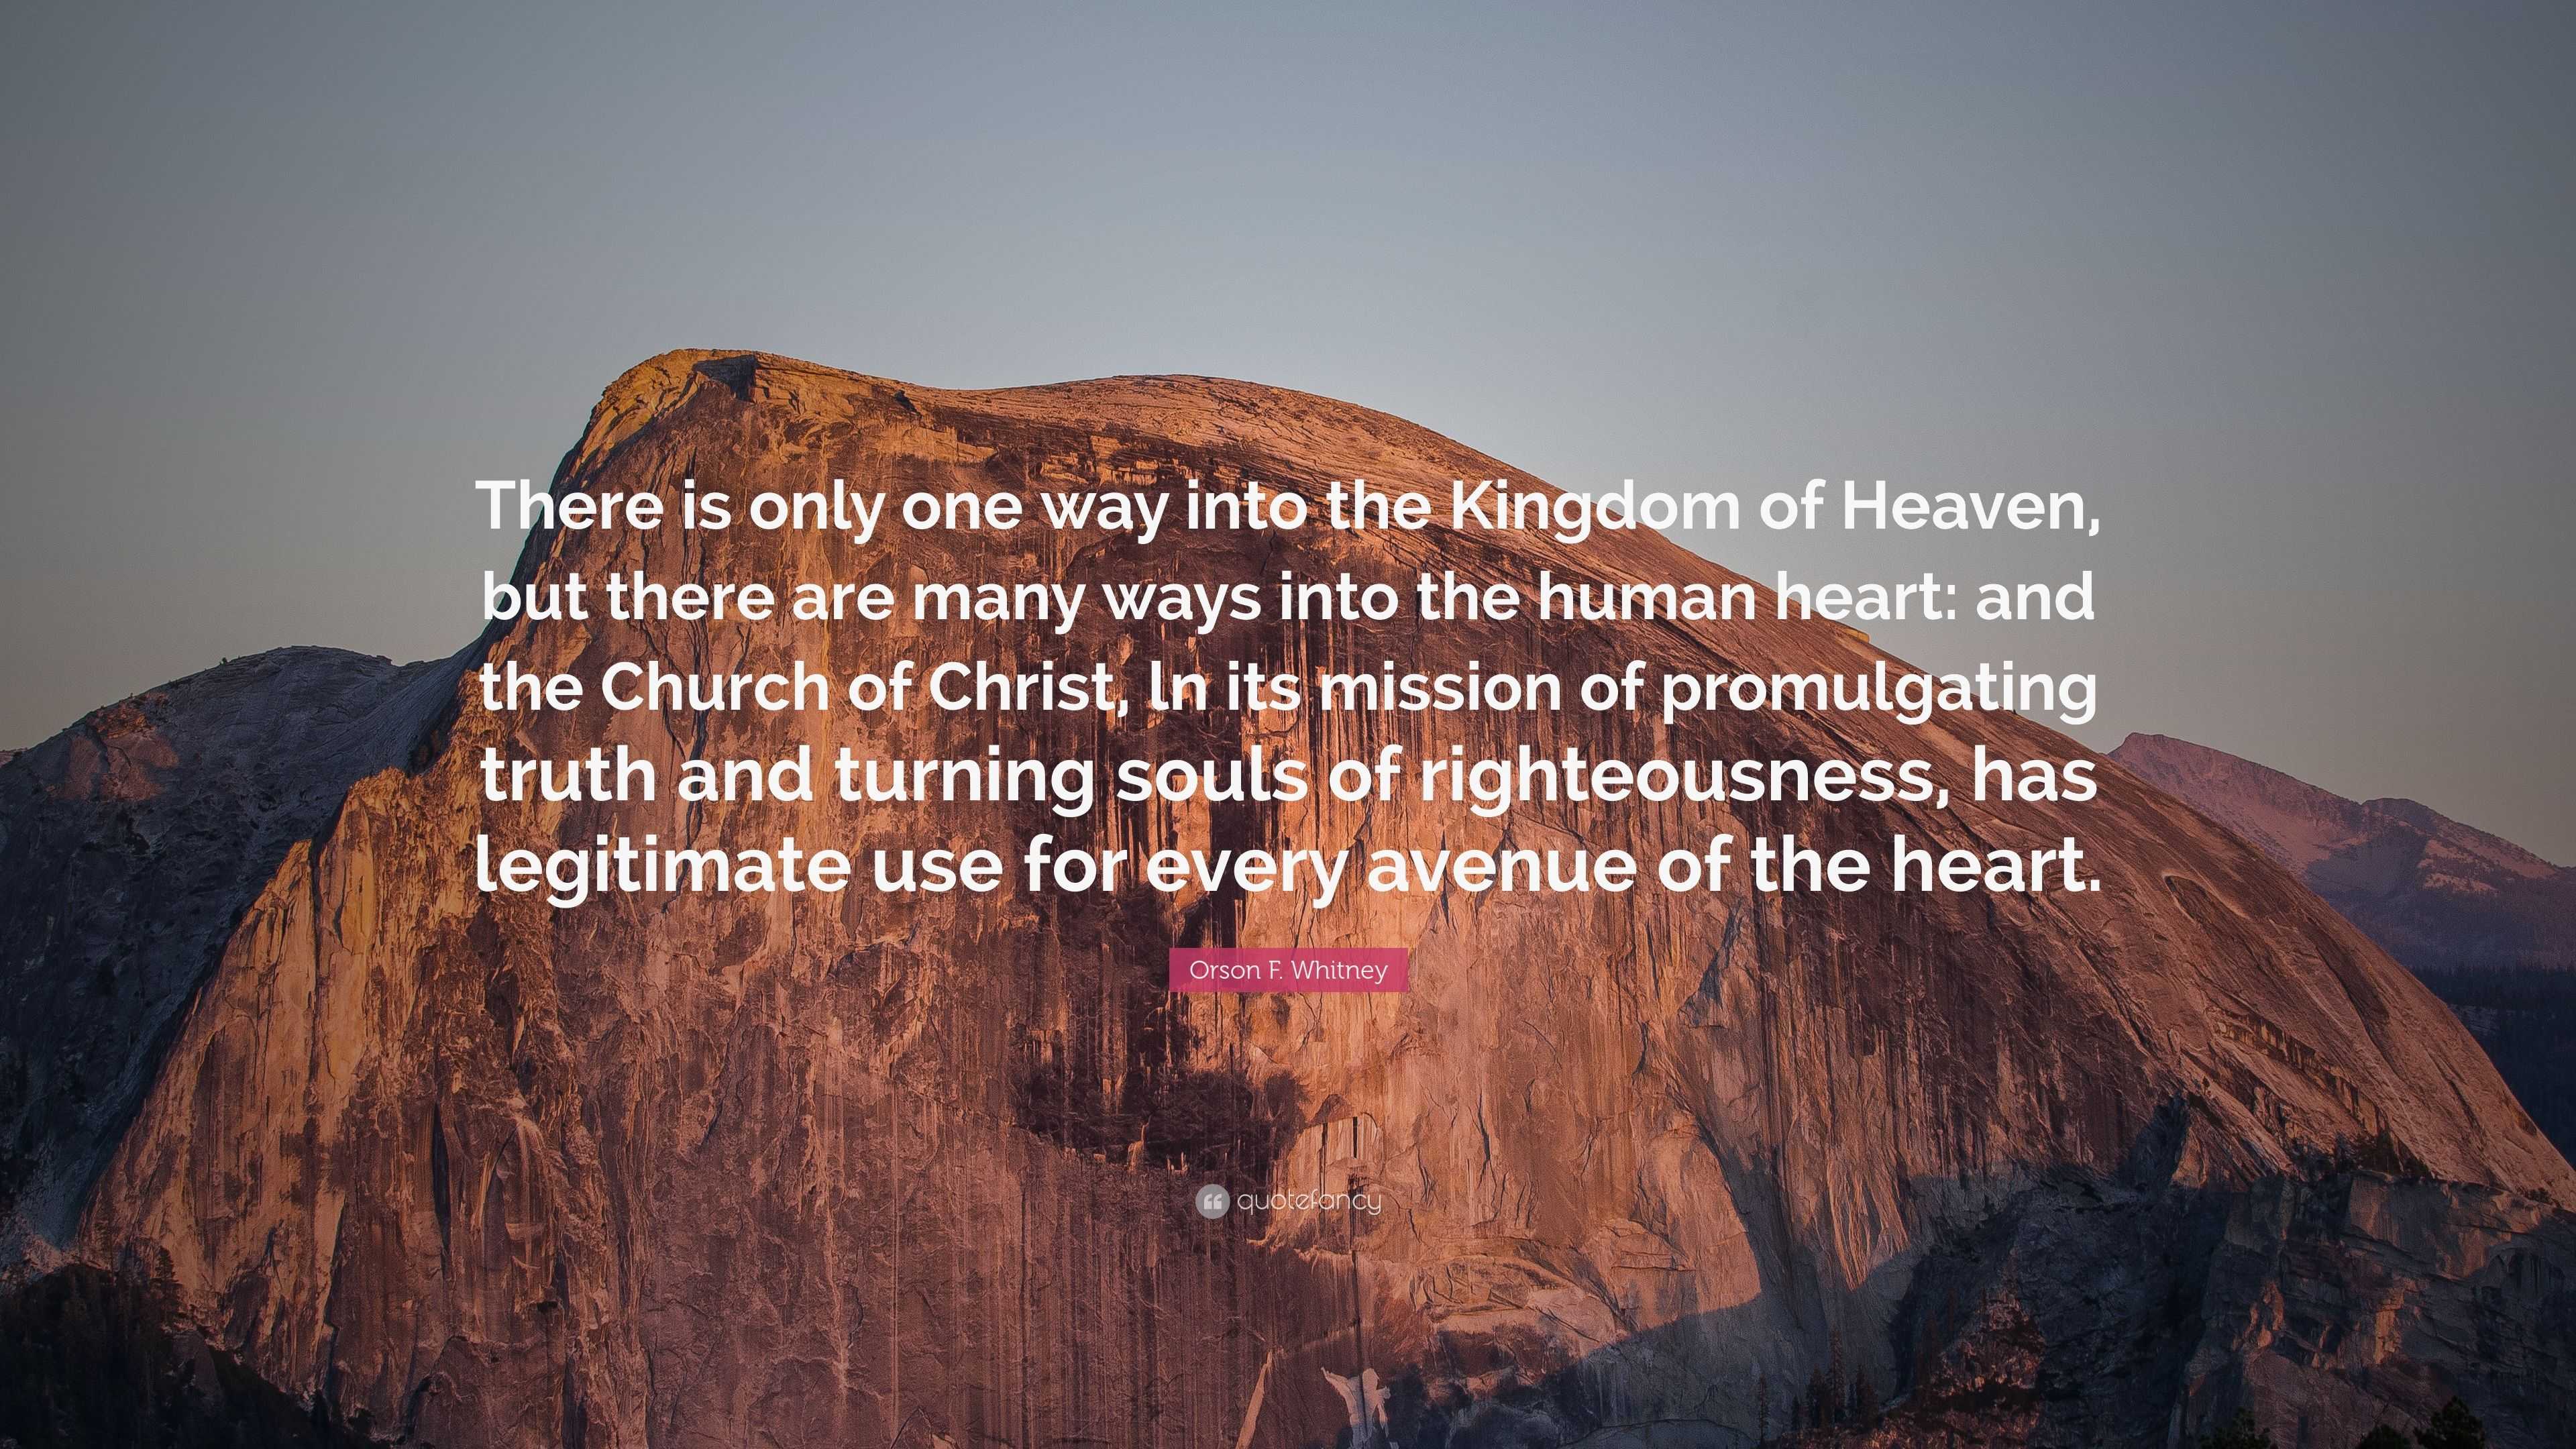 Orson F Whitney Quote There Is Only One Way Into The Kingdom Of Heaven But There Are Many Ways Into The Human Heart And The Church Of Christ